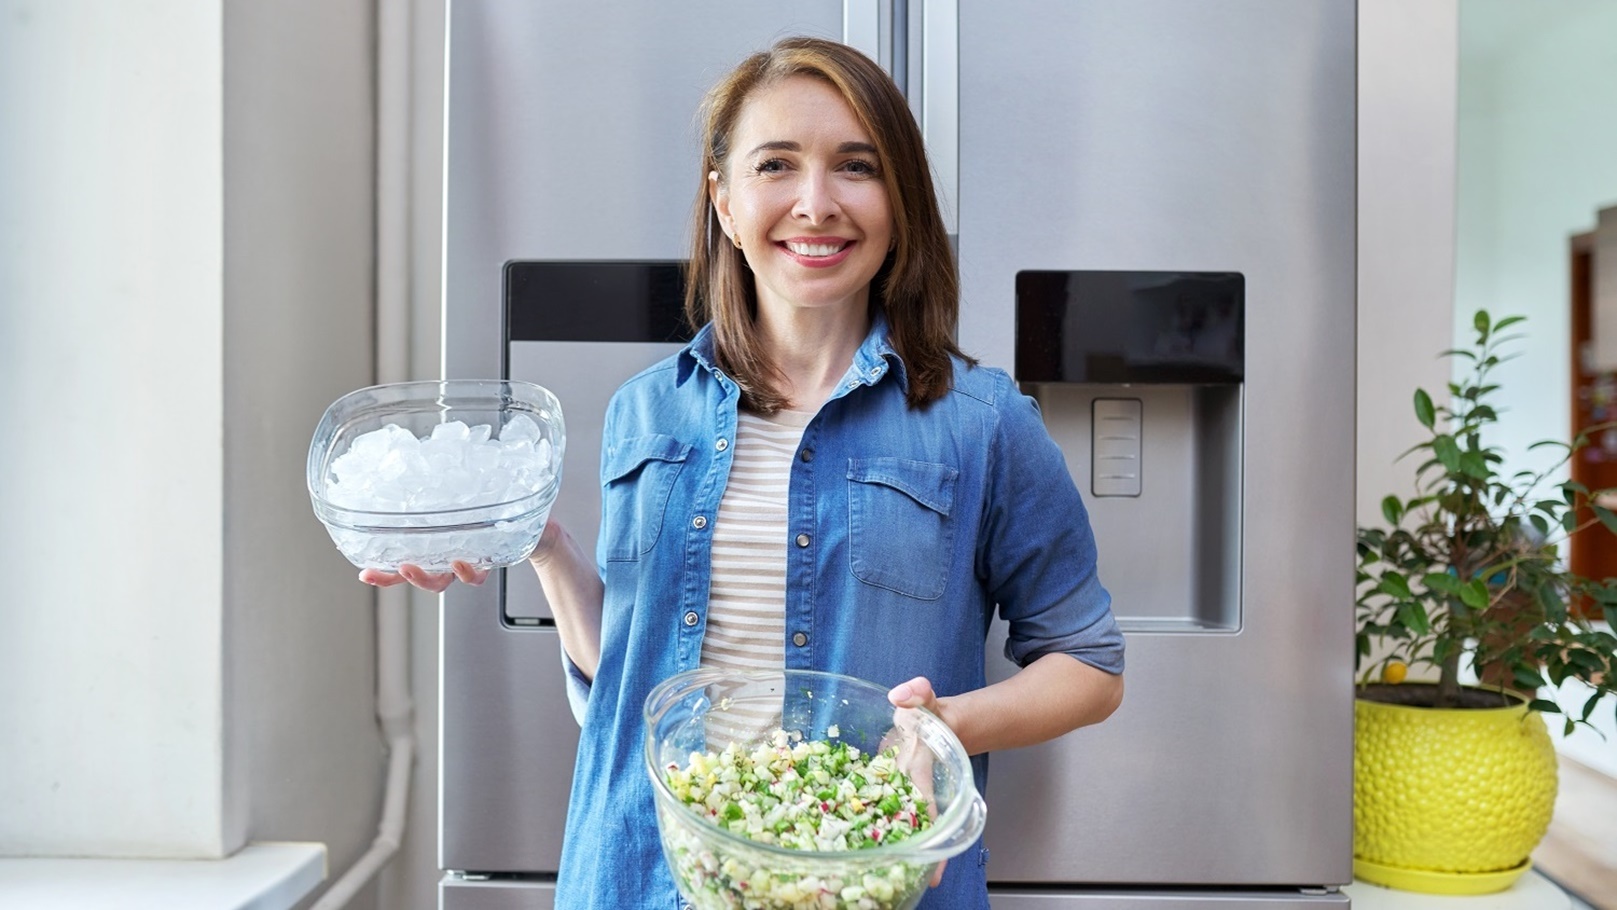 smiling-woman-with-bowl-of-ice-and-plate-of-vegeta-2022-01-20-19-58-27-utc (1)